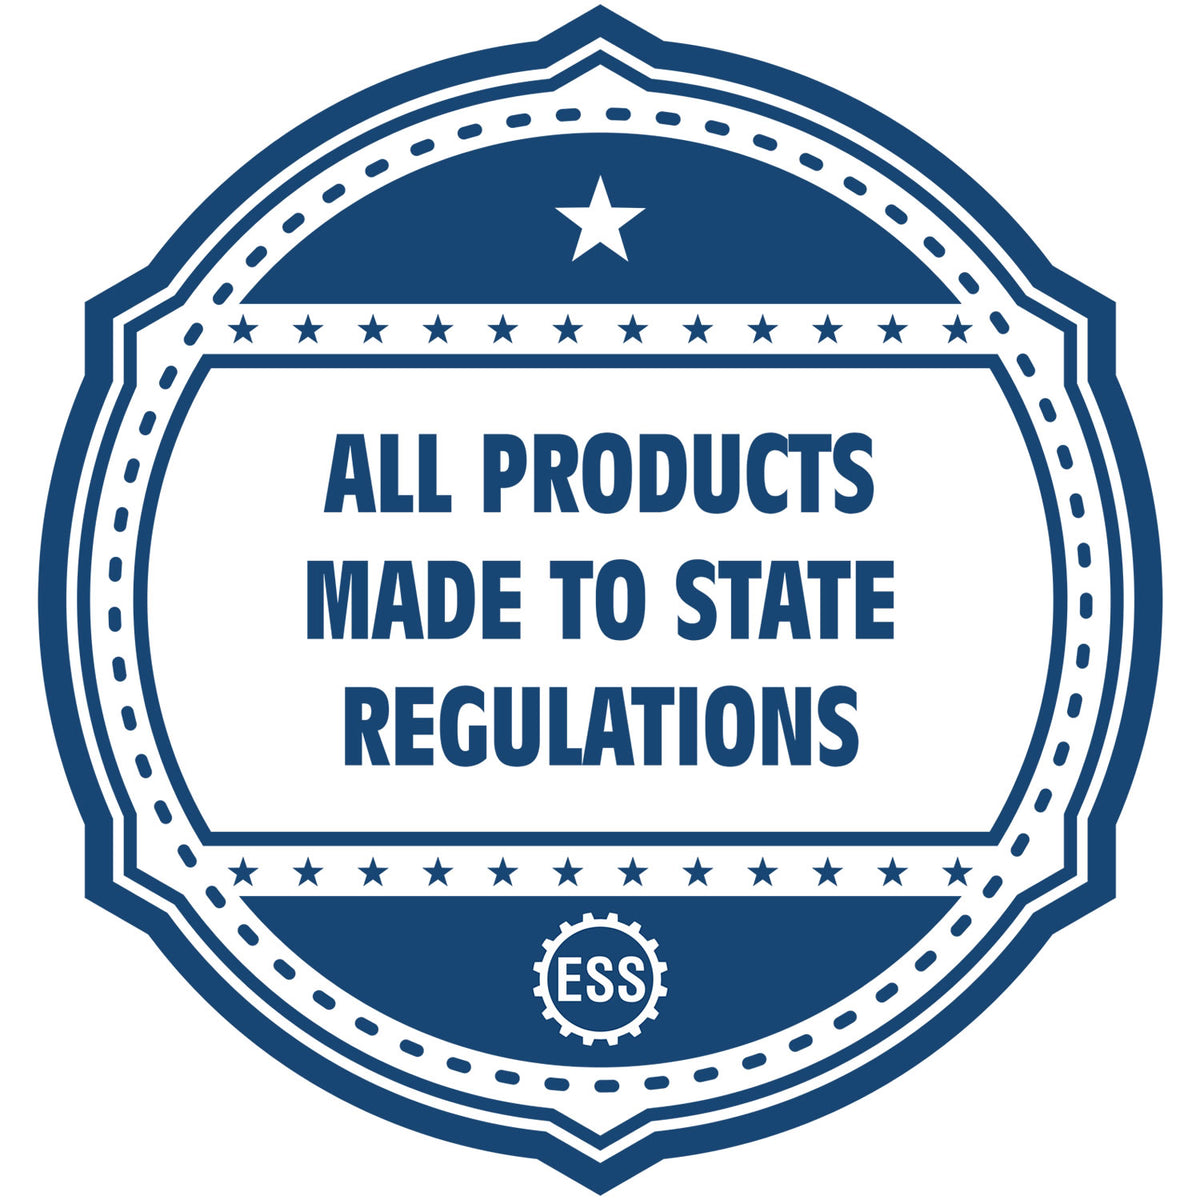 An icon or badge element for the Illinois Engineer Desk Seal showing that this product is made in compliance with state regulations.